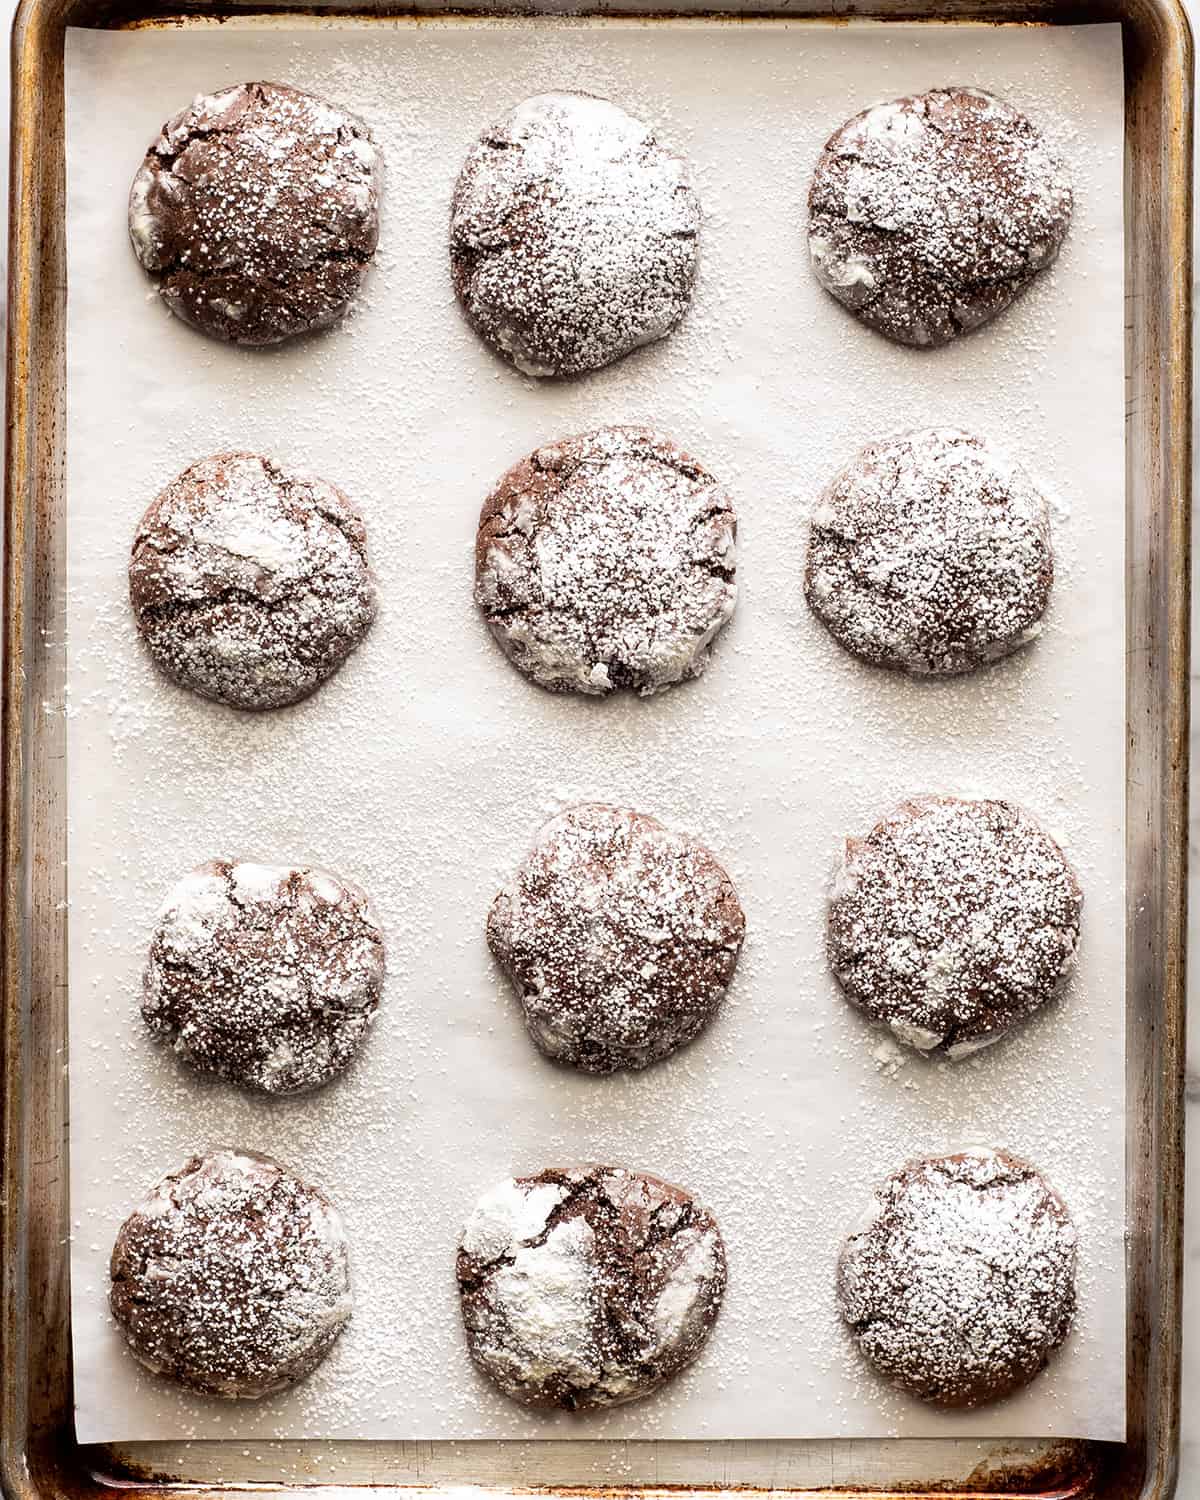 crinkles coated in powdered sugar on a baking sheet after baking